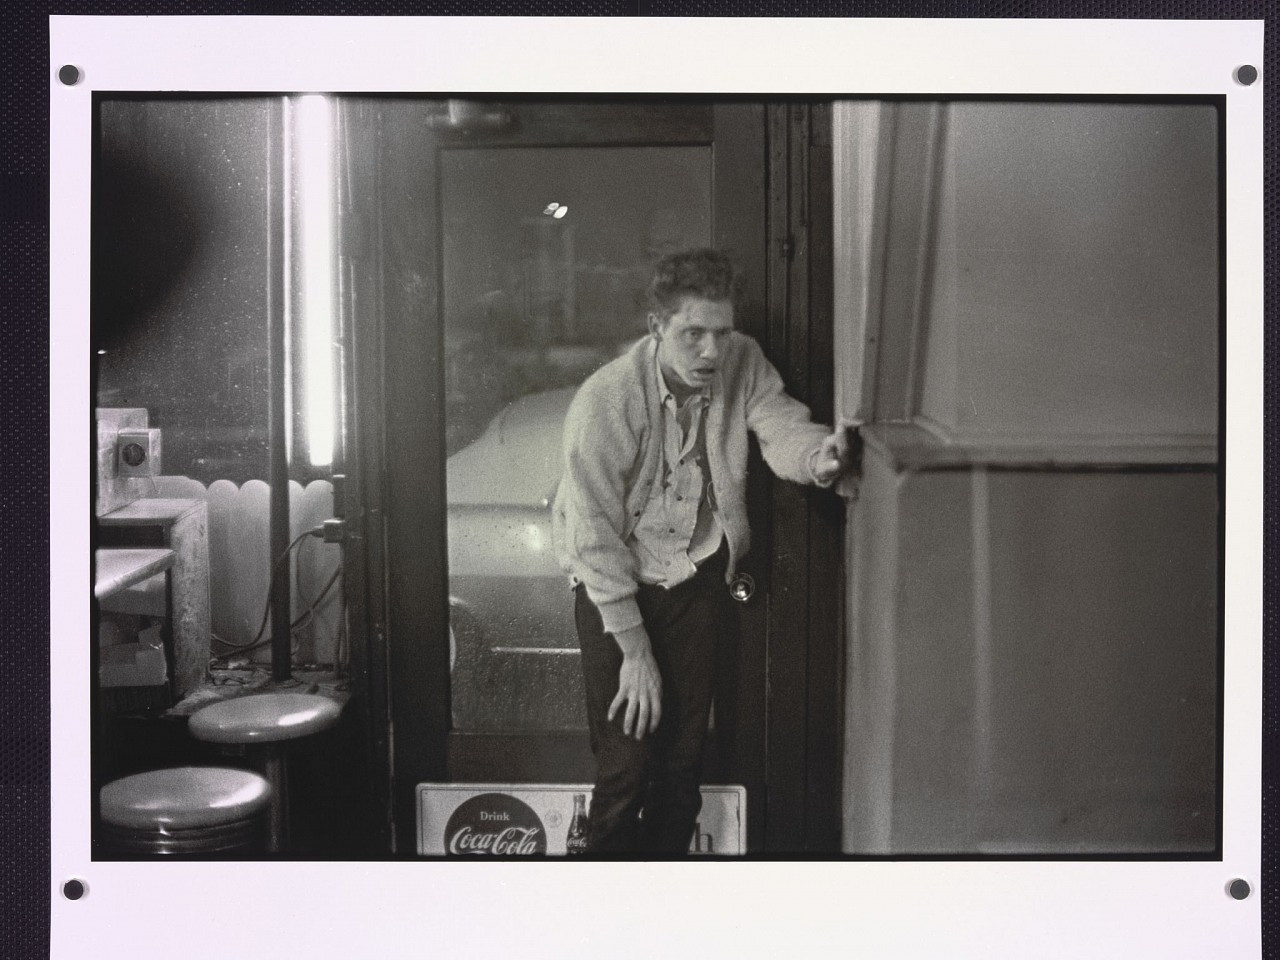 Danny LYON, After being hit with a blackjack, Stoplight Cafe, Cicero, Illinois, 1966
Later gelatin silver print, 11 x 14 in.
2017.03.041
ADDITIONAL INFORMATION: Illustrated: Danny Lyon, Pictures from the New World, (New York: Aperture, 1981), p. 42
Credit Line: Lafayette College Art Collection, Easton, PA; Gift of Bennett ('79) and Meg Goodman